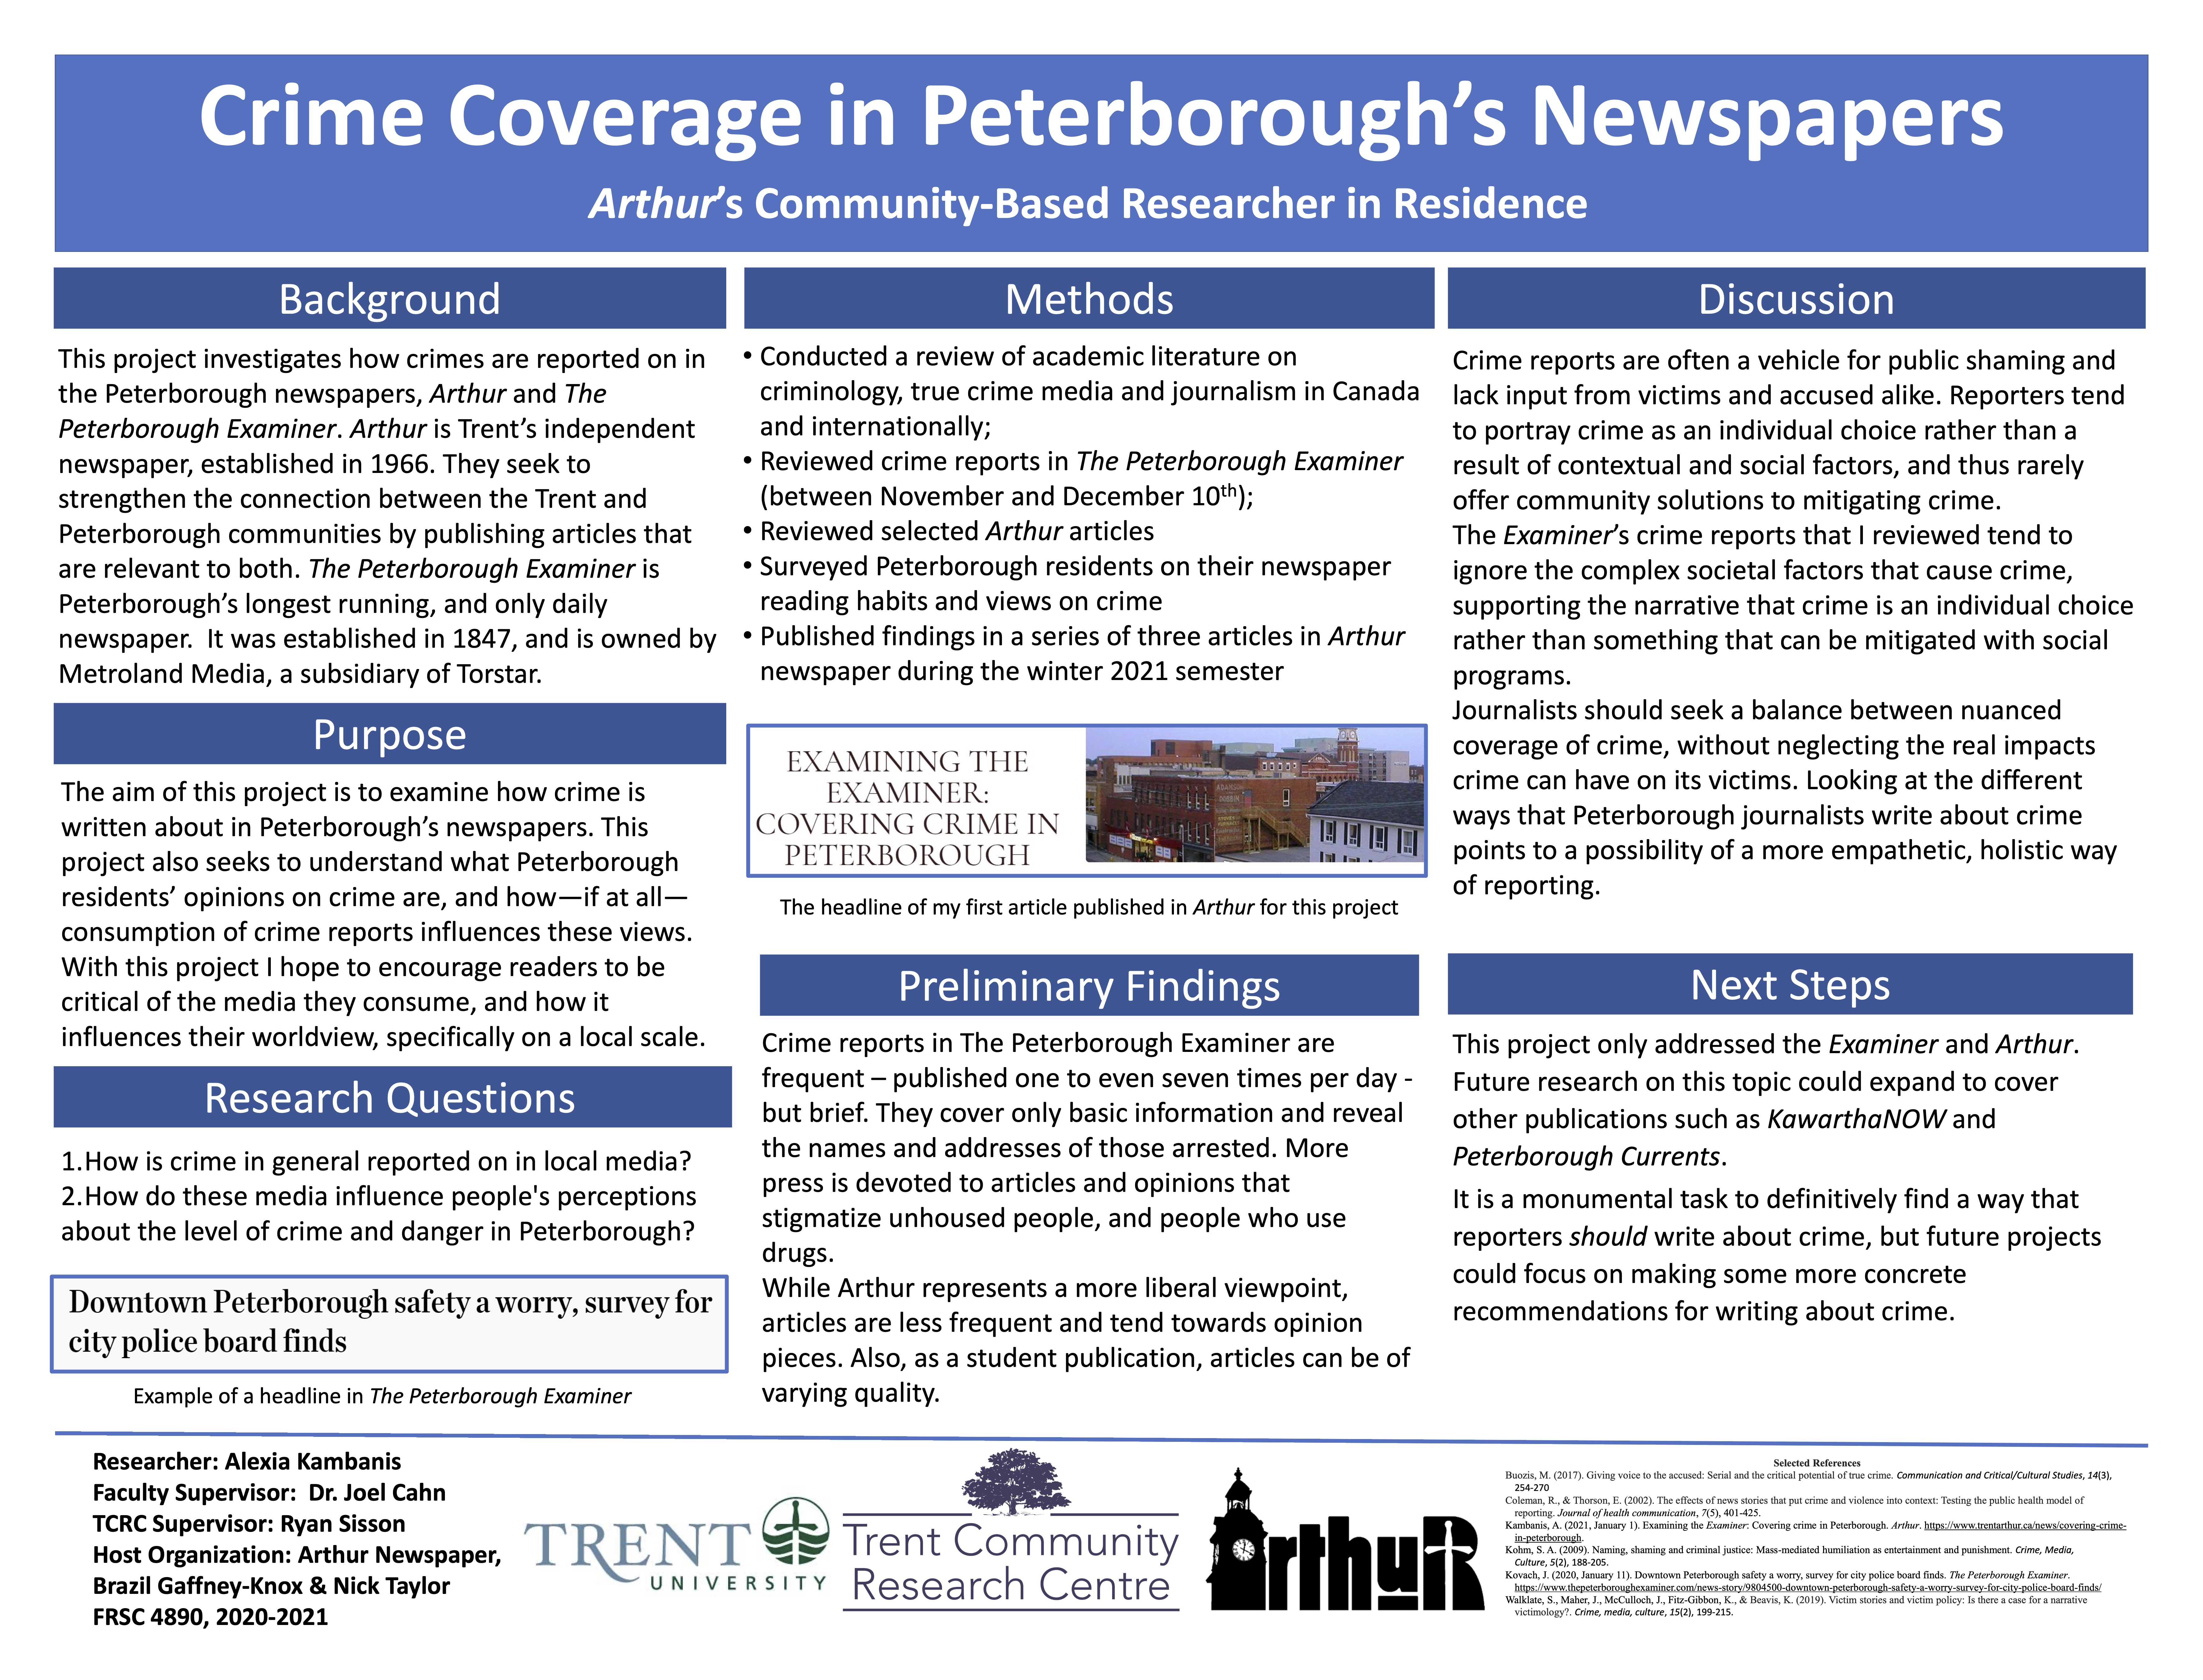 Research Poster for Crime Coverage in Peterborough's Newspapers